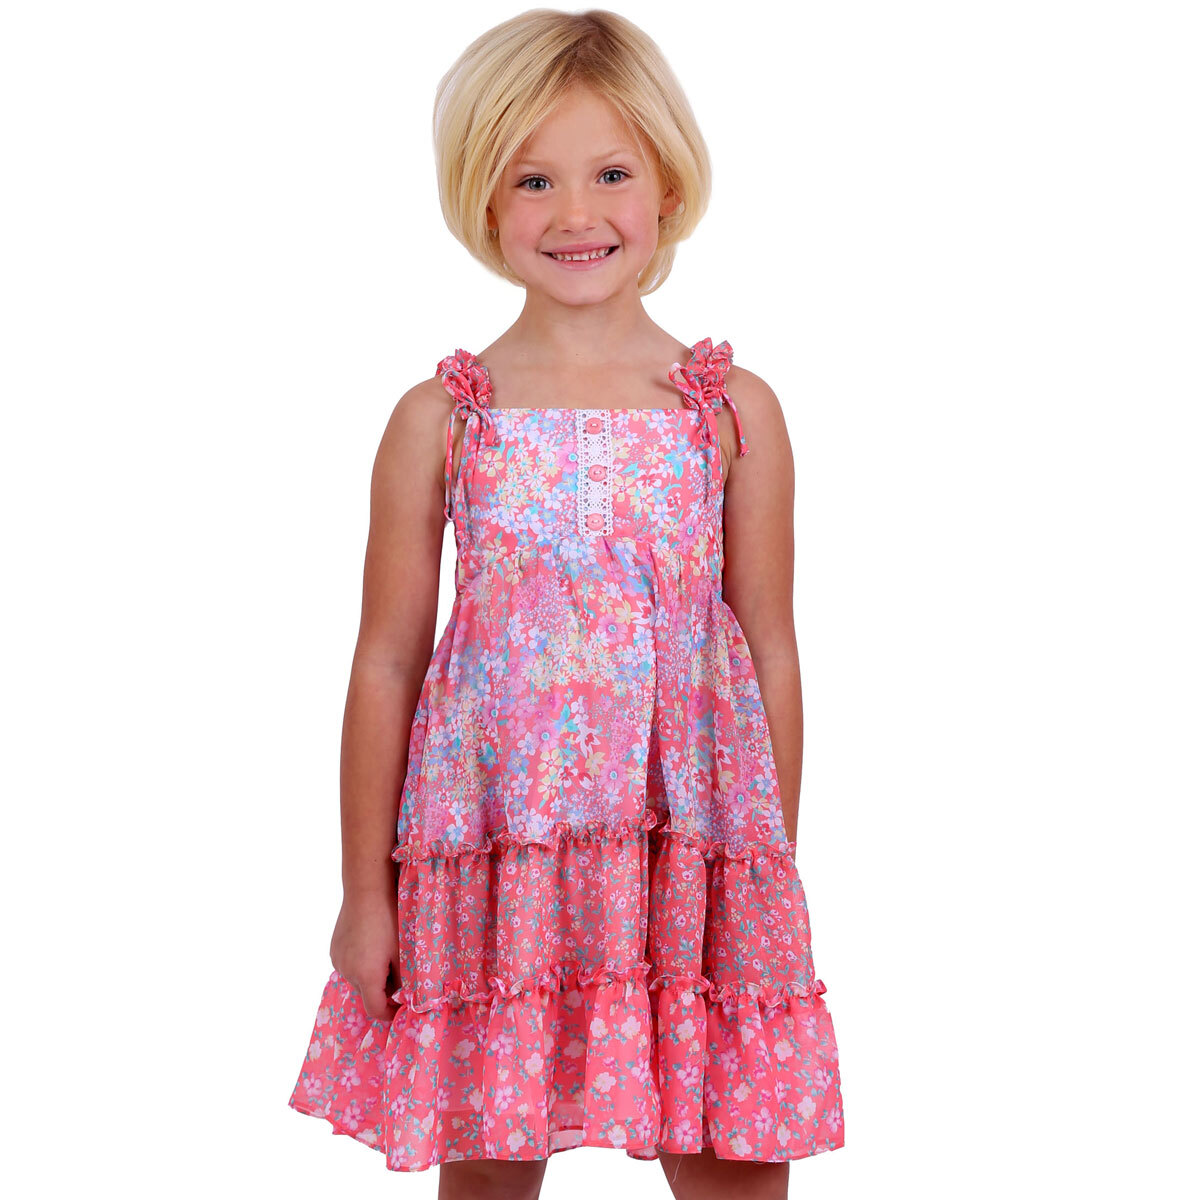 Jona Michelle Girl's Sundress in Pink Floral, Size 5 | Costco UK